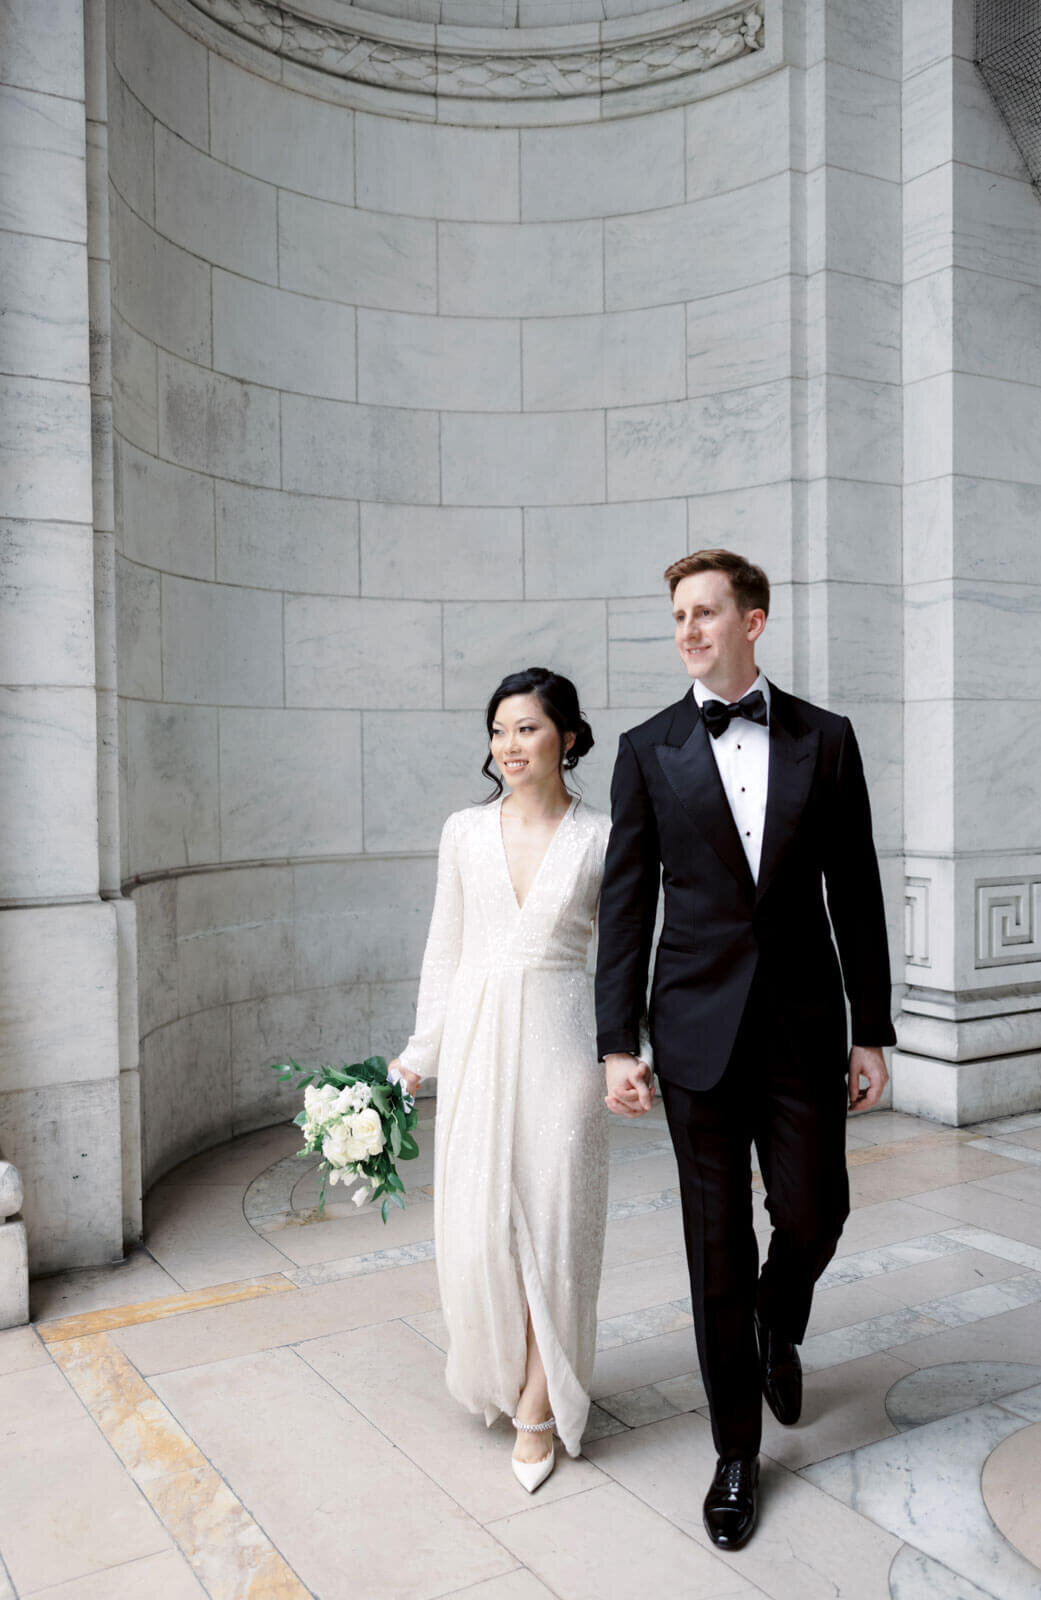 The bride and the groom are holding hands inside New York Public Library, NYC, with a very high ceiling. Image by Jenny Fu Studio